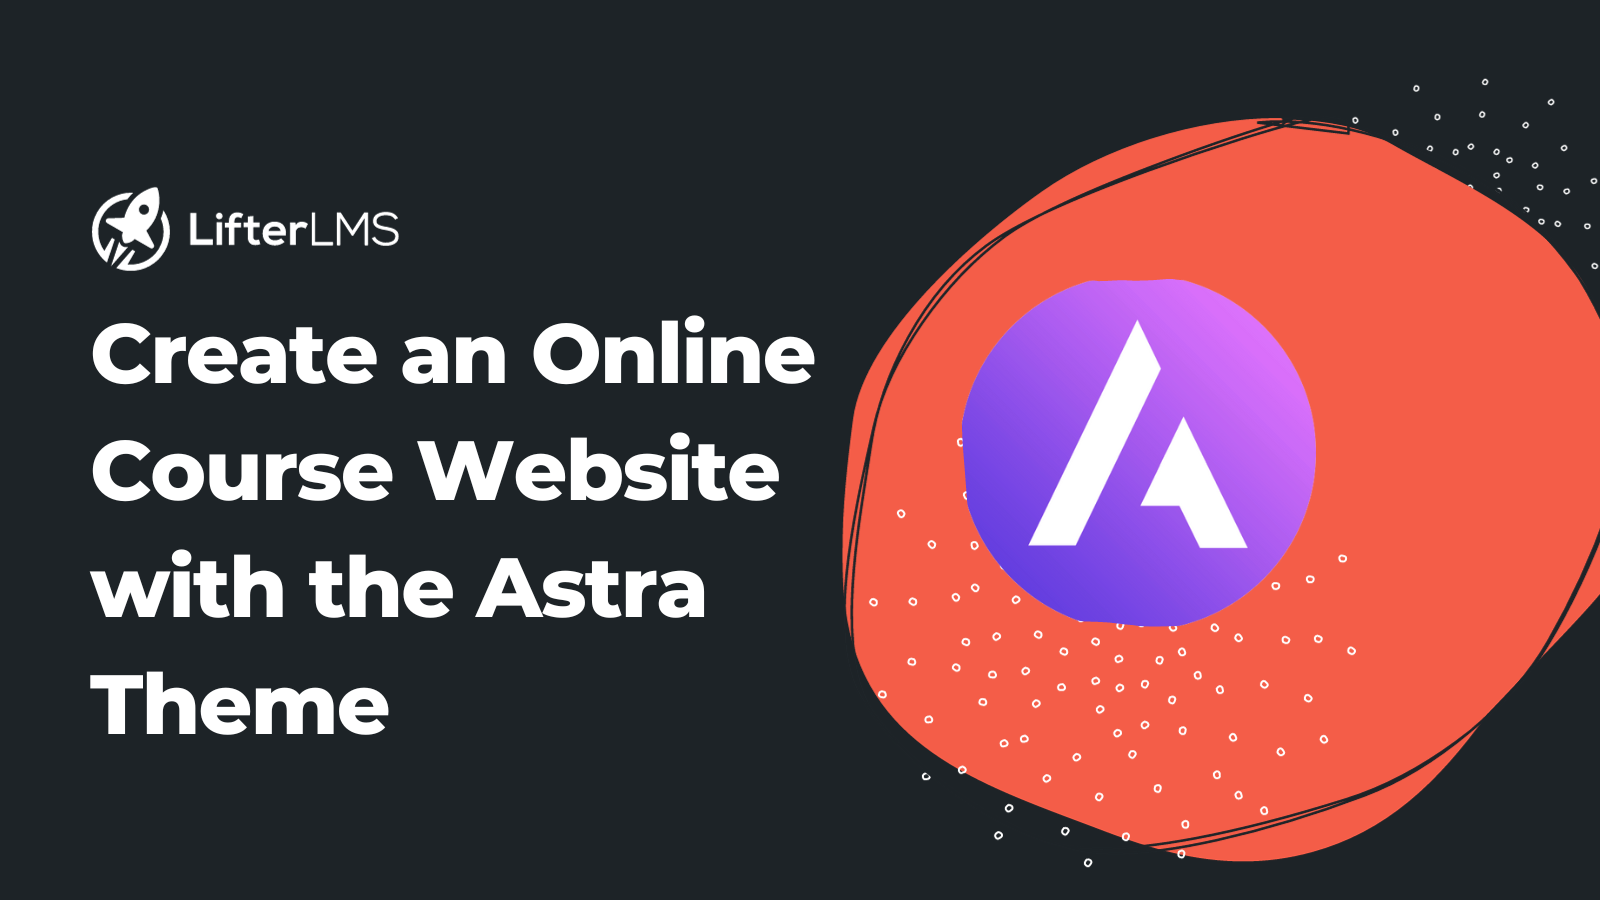 How to Create an Online Course Website with Astra and LifterLMS